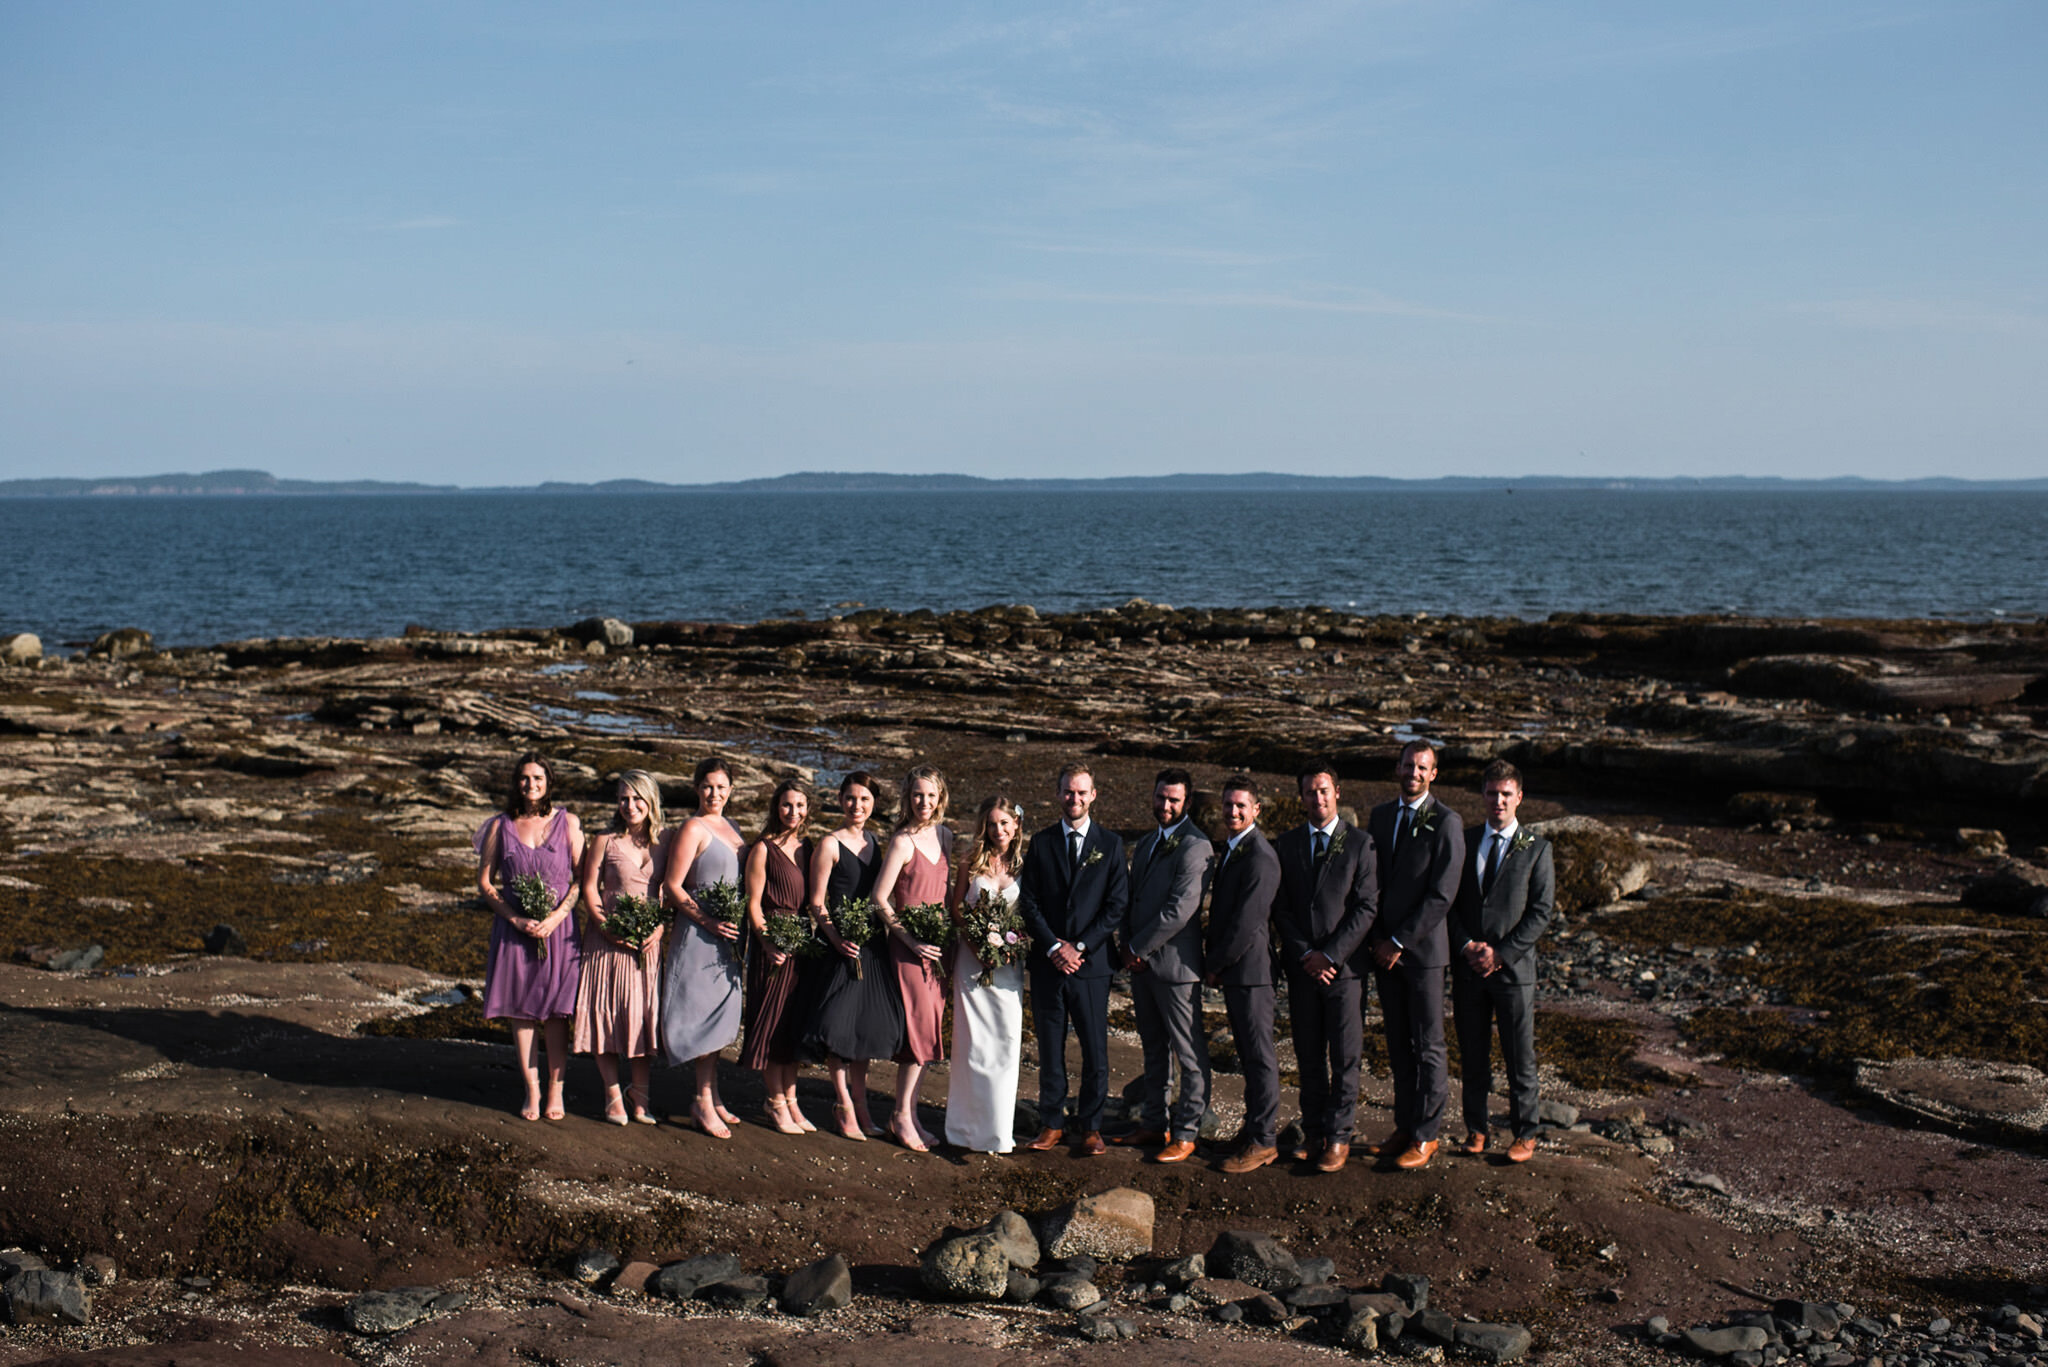 183-mix-match-wedding-party-by-the-ocean-destination-wedding-st--andrews-by-the-sea-photos.jpg